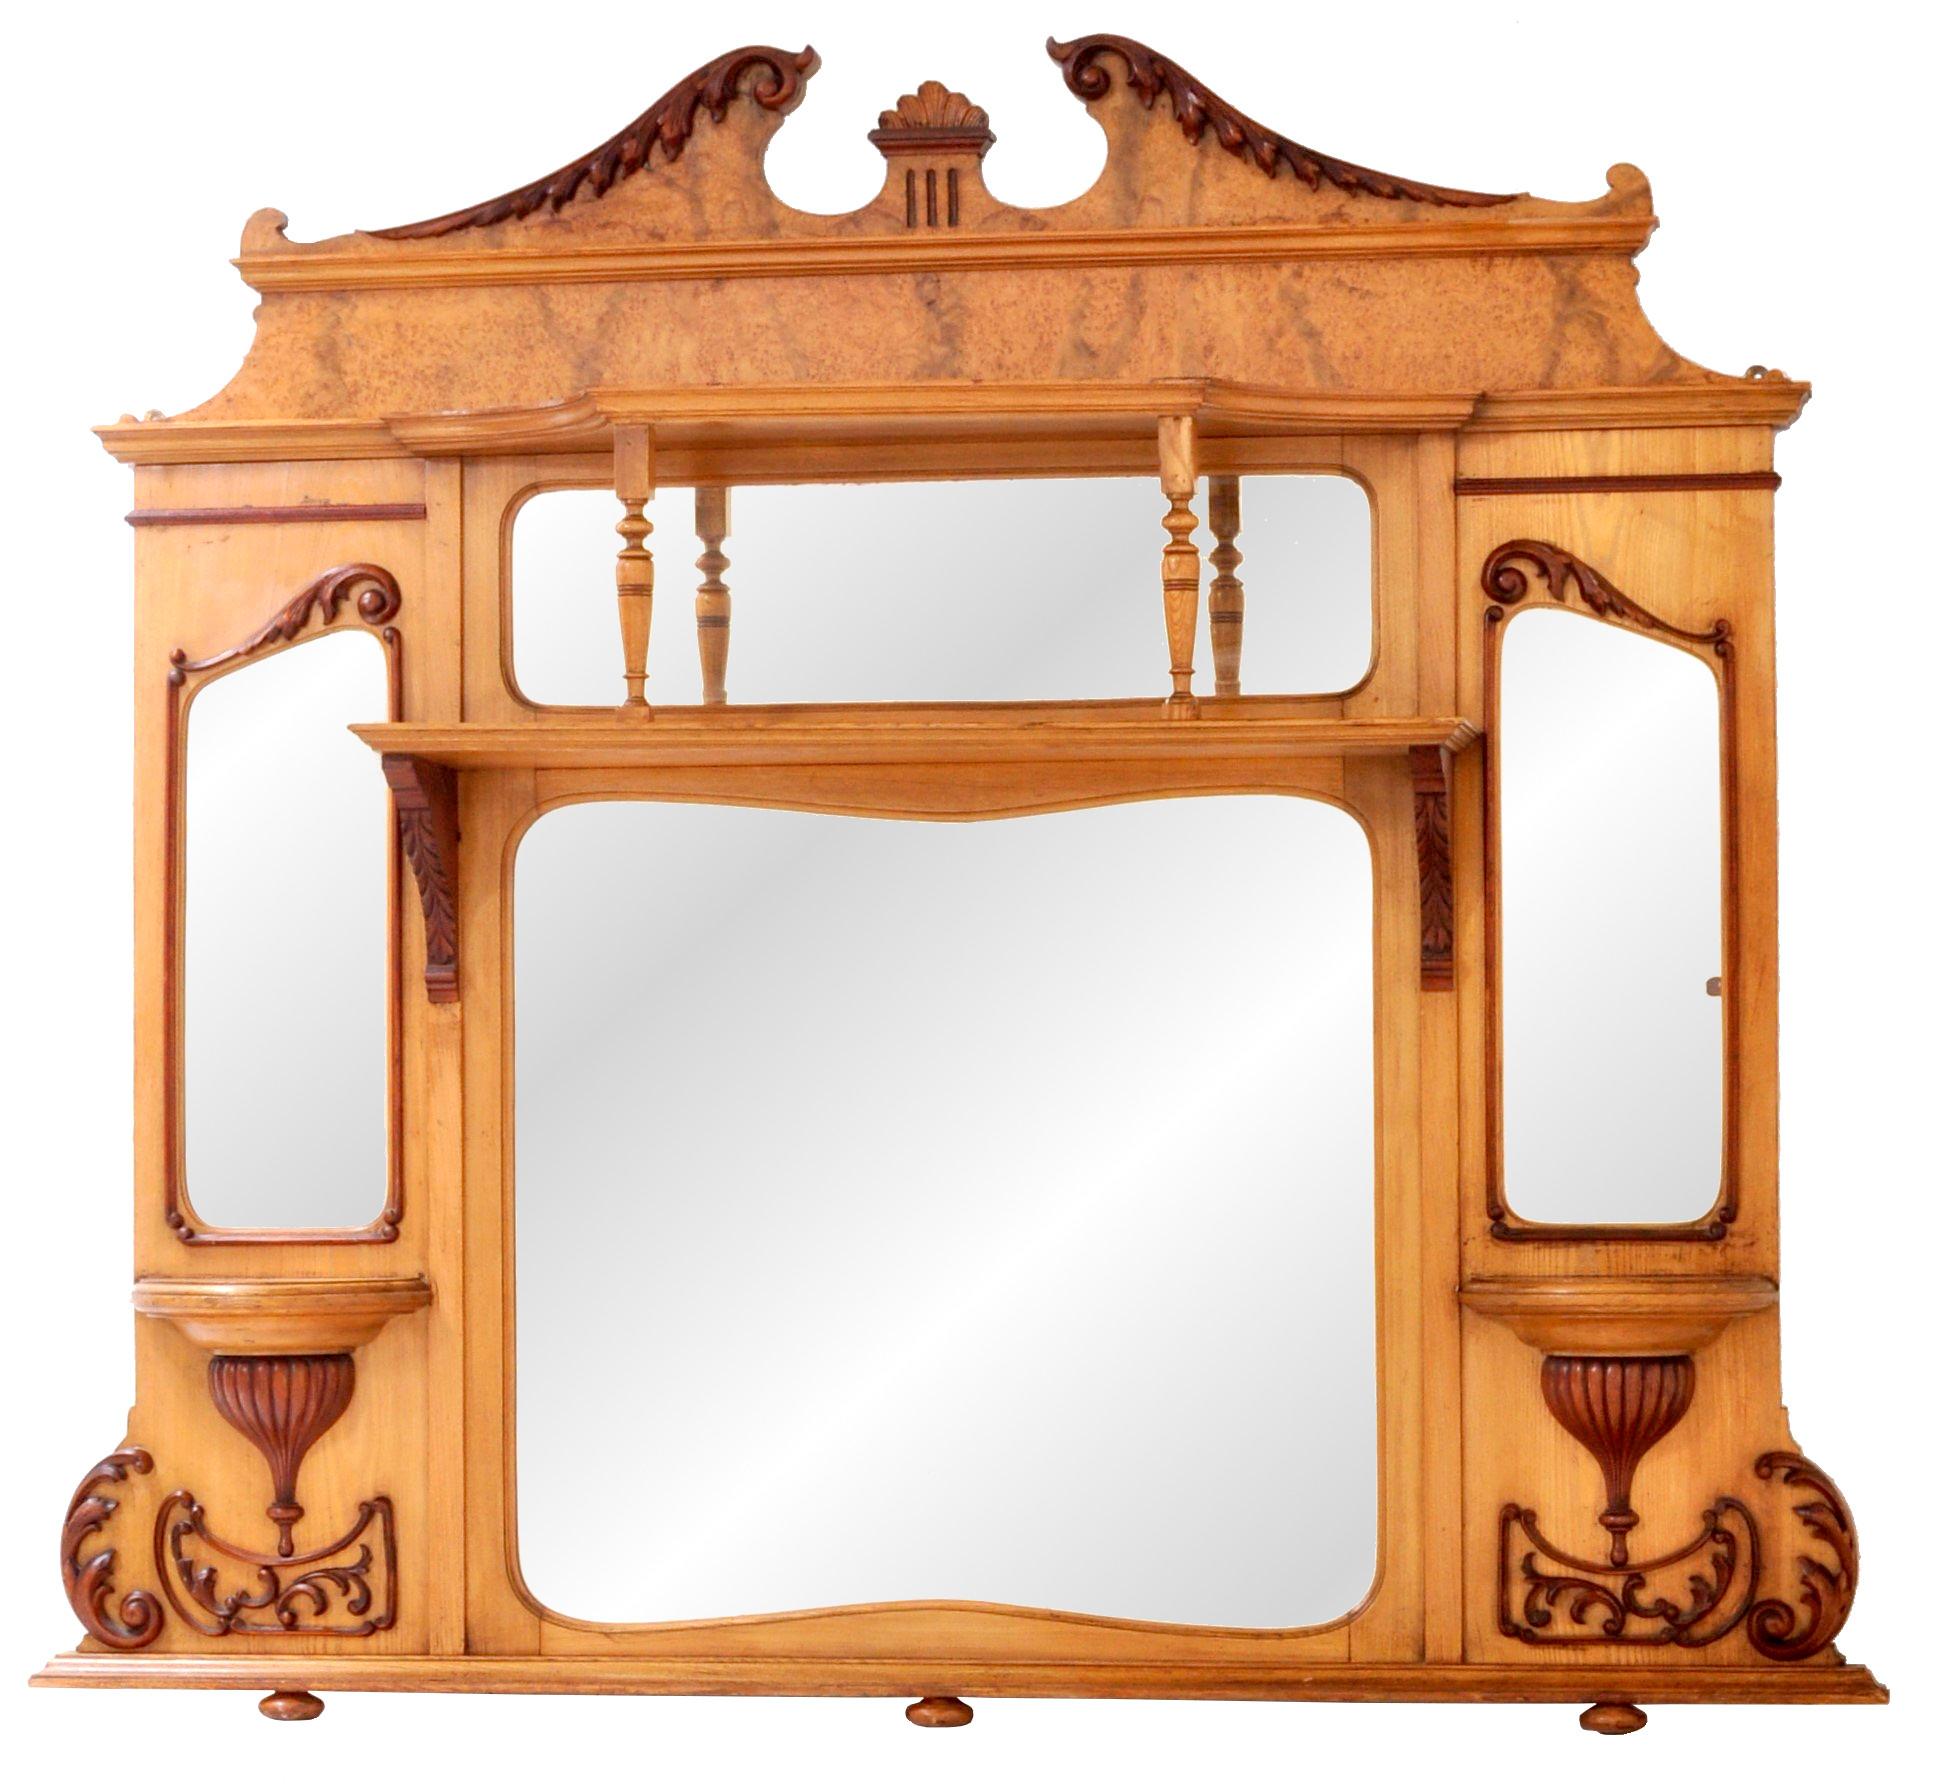 A substantial antique American walnut and ash overmantel mirror, circa 1870. The mirror of neoclassical form and having a swan's neck pediment to the top with applied carvings. Below are two shelves supported by turned supports, the center having